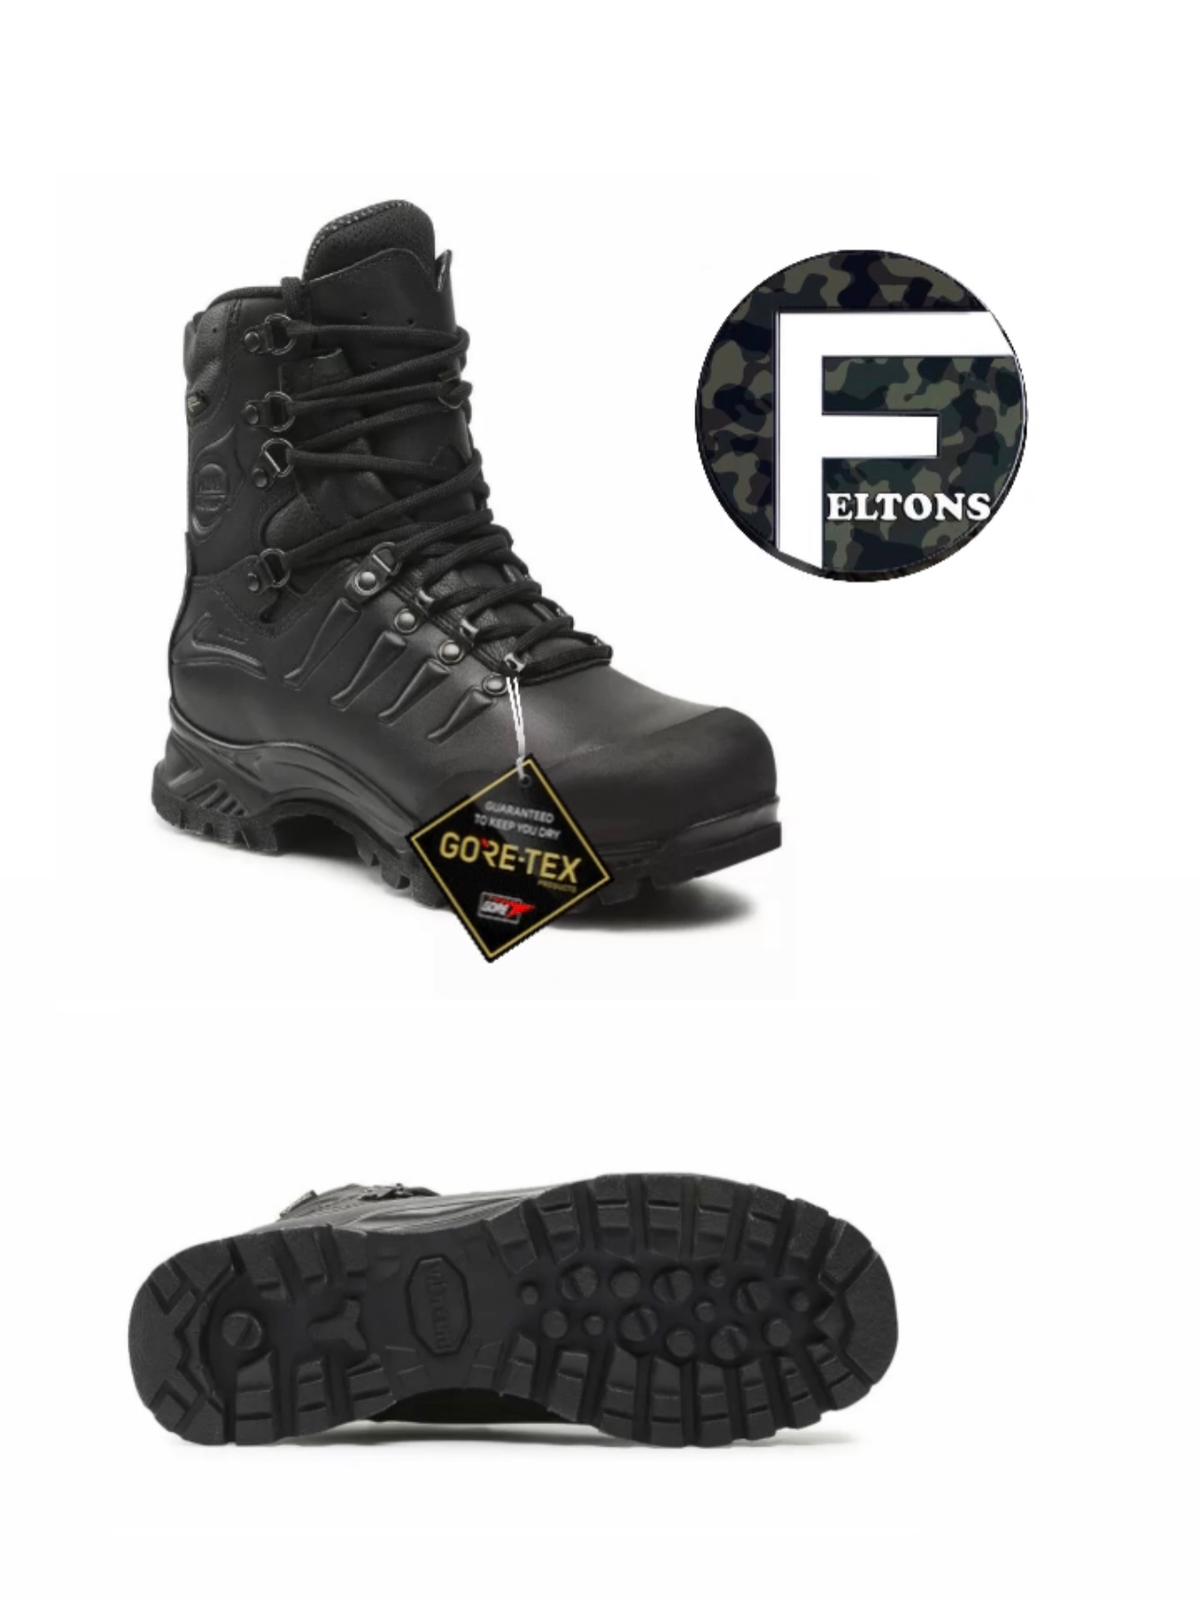 Original Bundeswehr Meindl Combat Extreme GORE-TEX 3787 combat boots (current model) available in different sizes